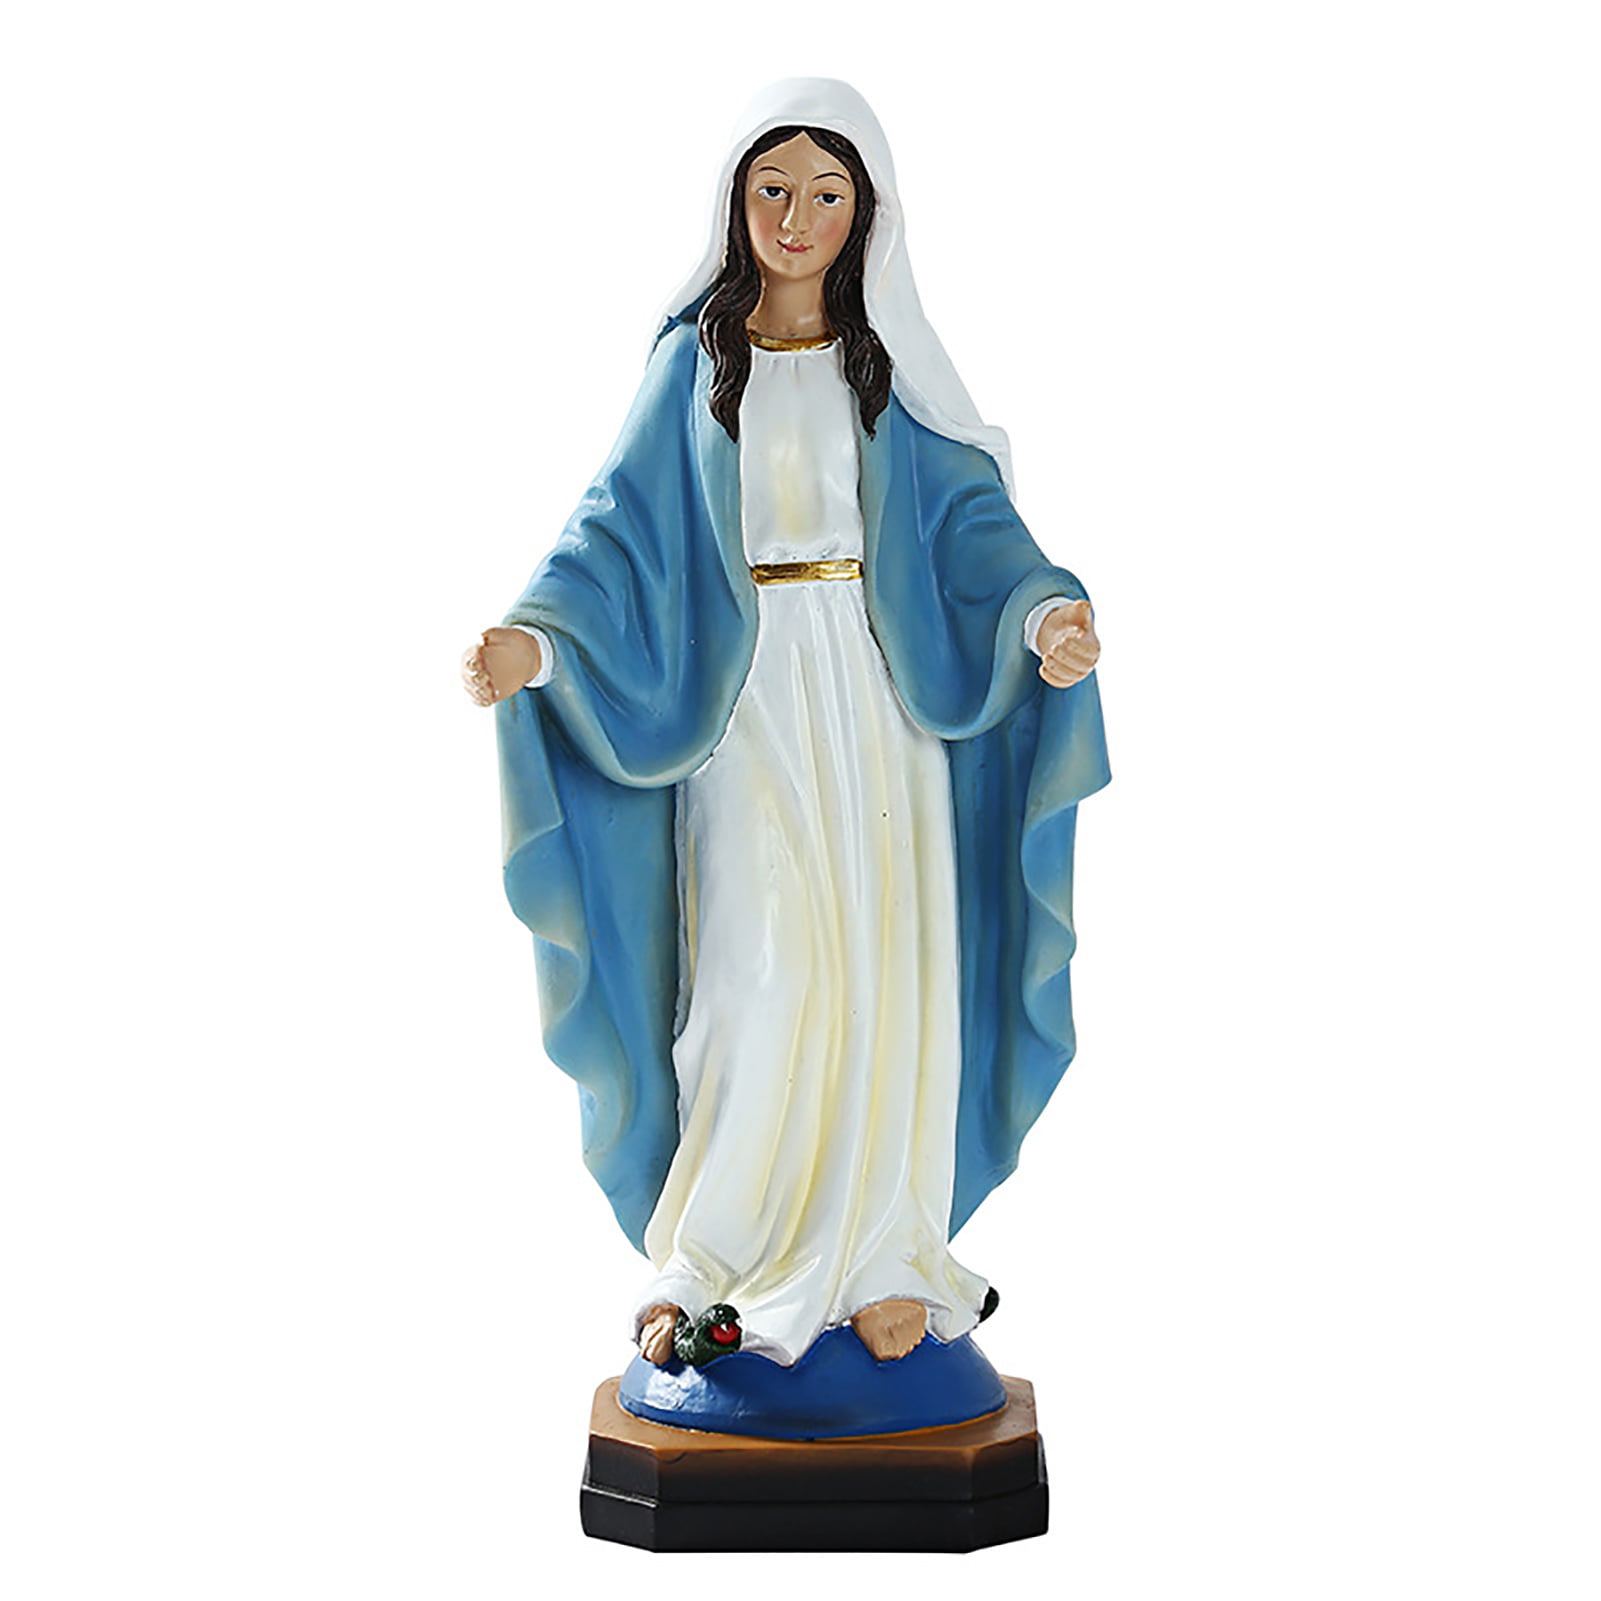 Our Lady of Grace Blessed Virgin Mother Mary Artistic Collection 18 Inch Resin Colored Large Statue Figurine